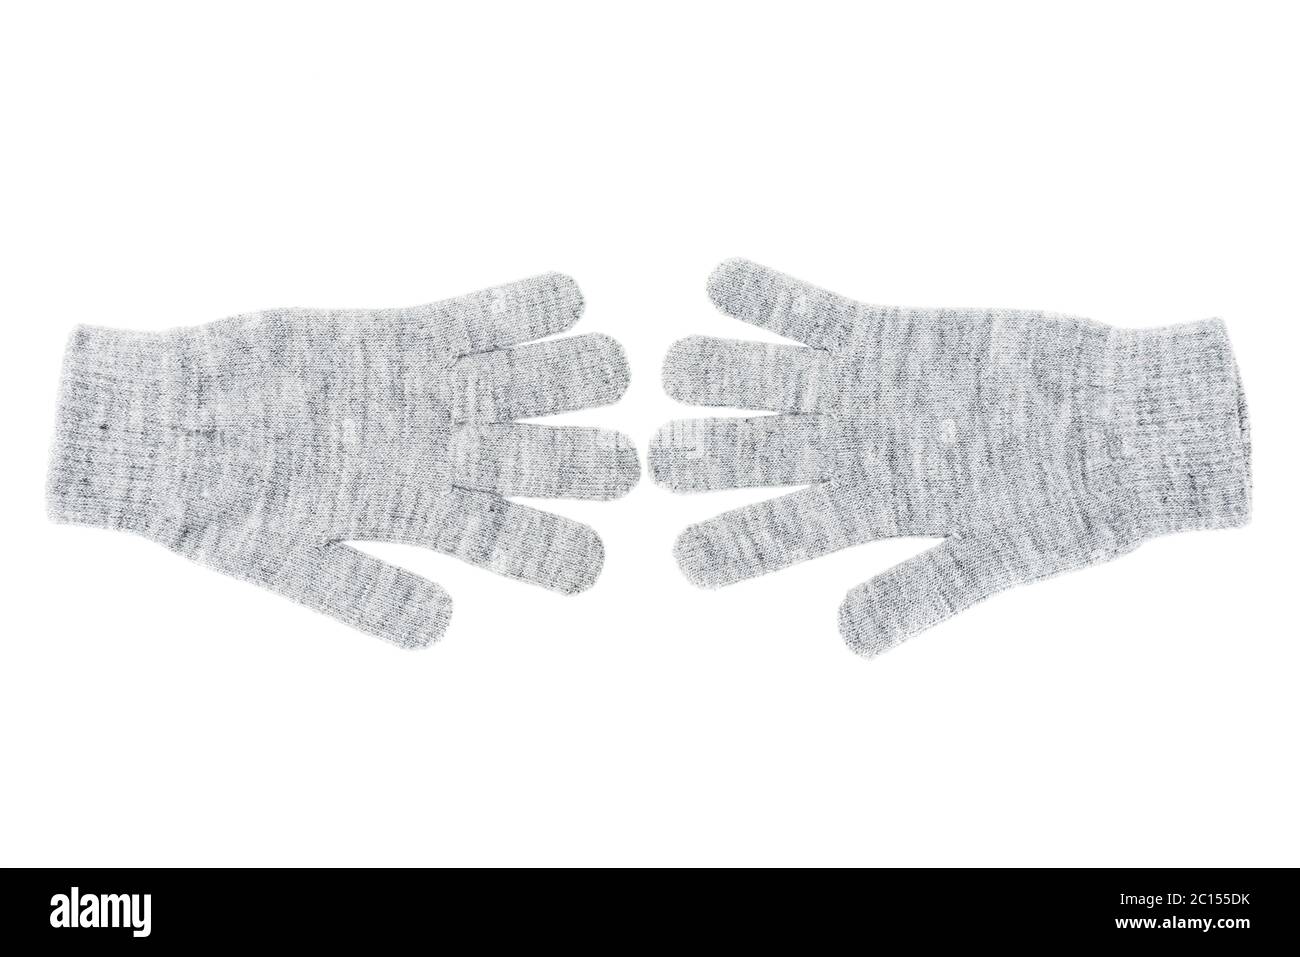 Wool gloves isolated Stock Photo